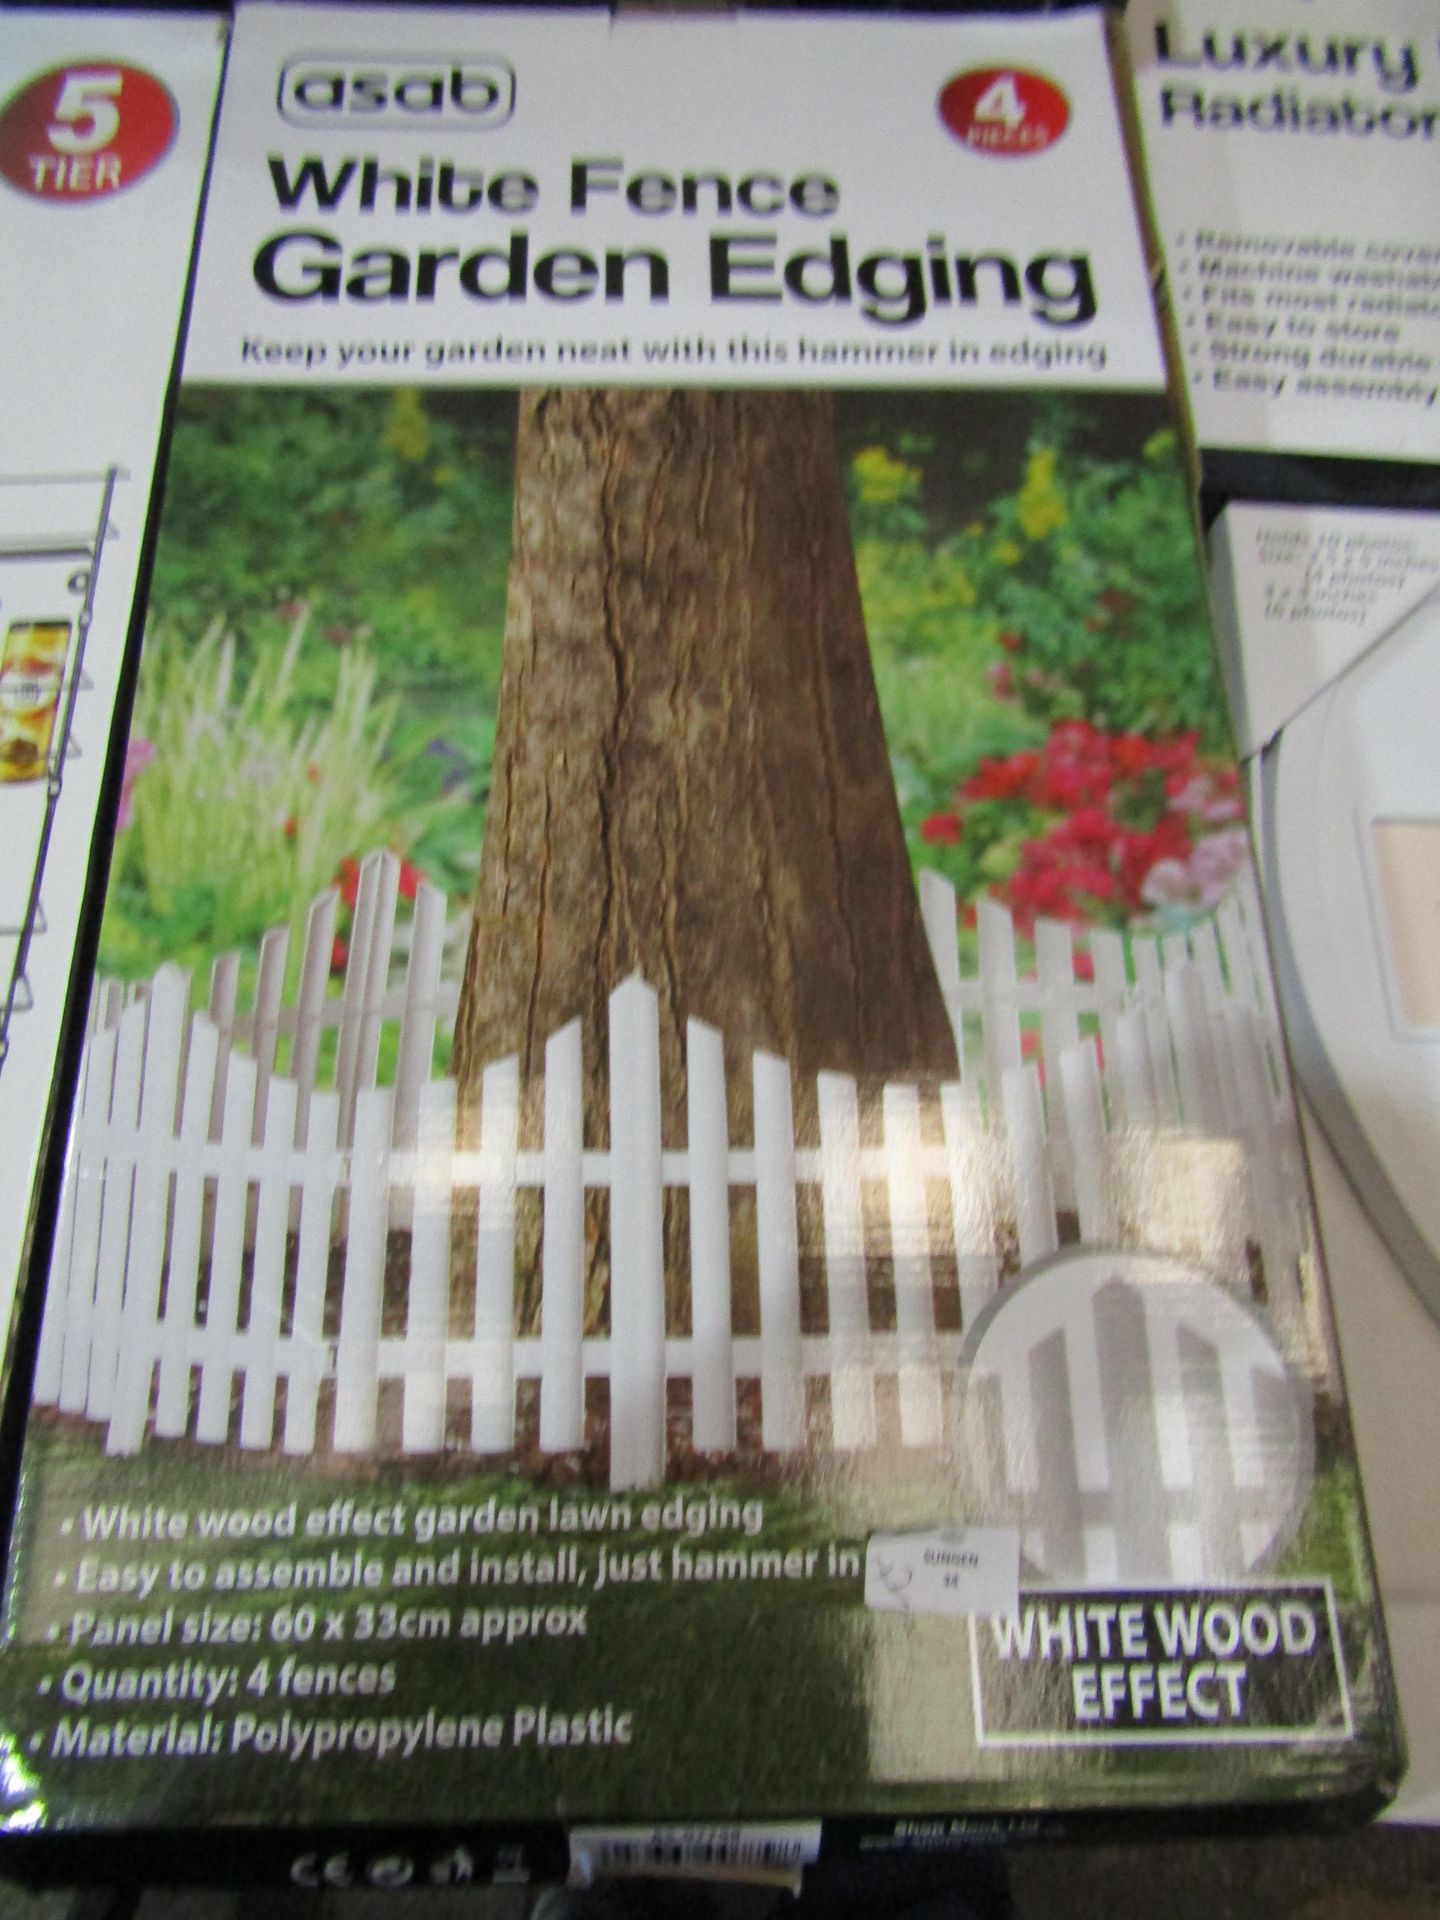 2x Asab 4-Pieces White Food Effect Fence Garden Edging, Panel Size: 60 x 33cm - Unchecked & Boxed.